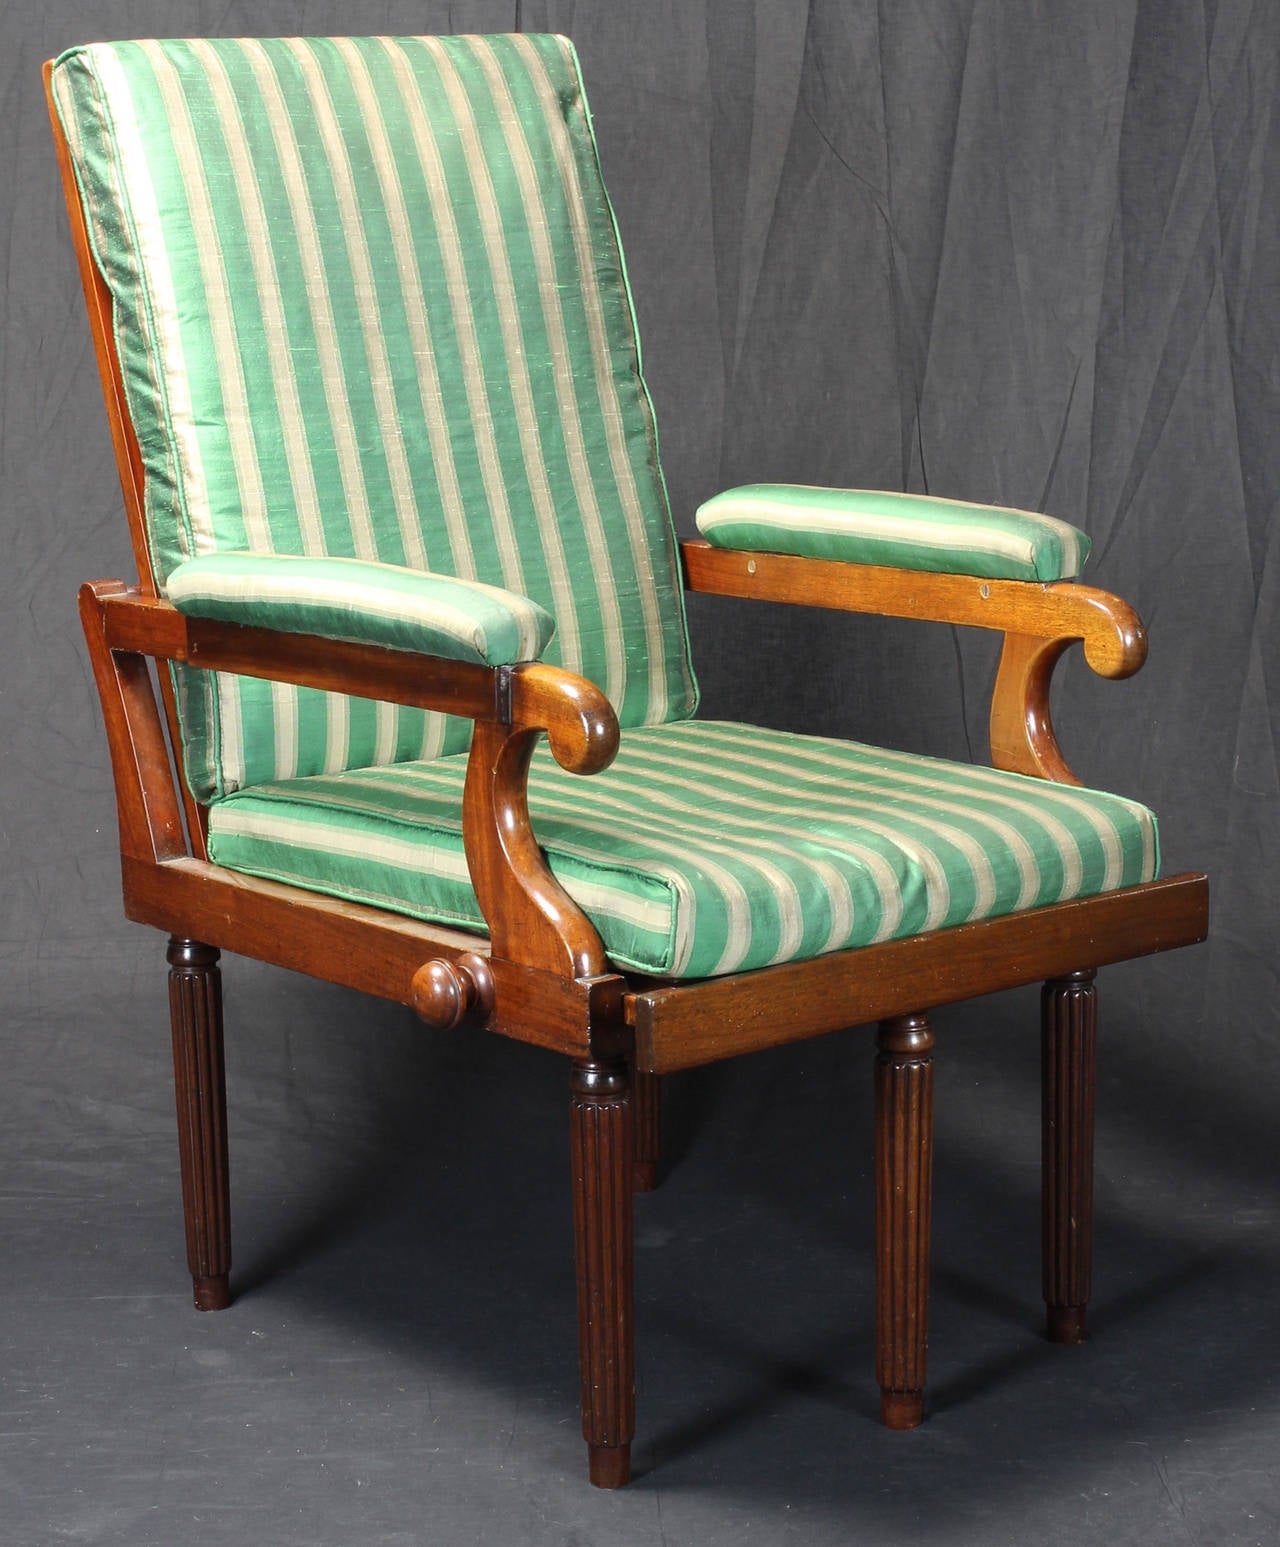 An early 19th century English mahogany Campaign library chair or chaise with caned seat and back and removable cushions. The chair remains in one when folded with the hinged back and arms falling forward against the seat. This is a very efficient